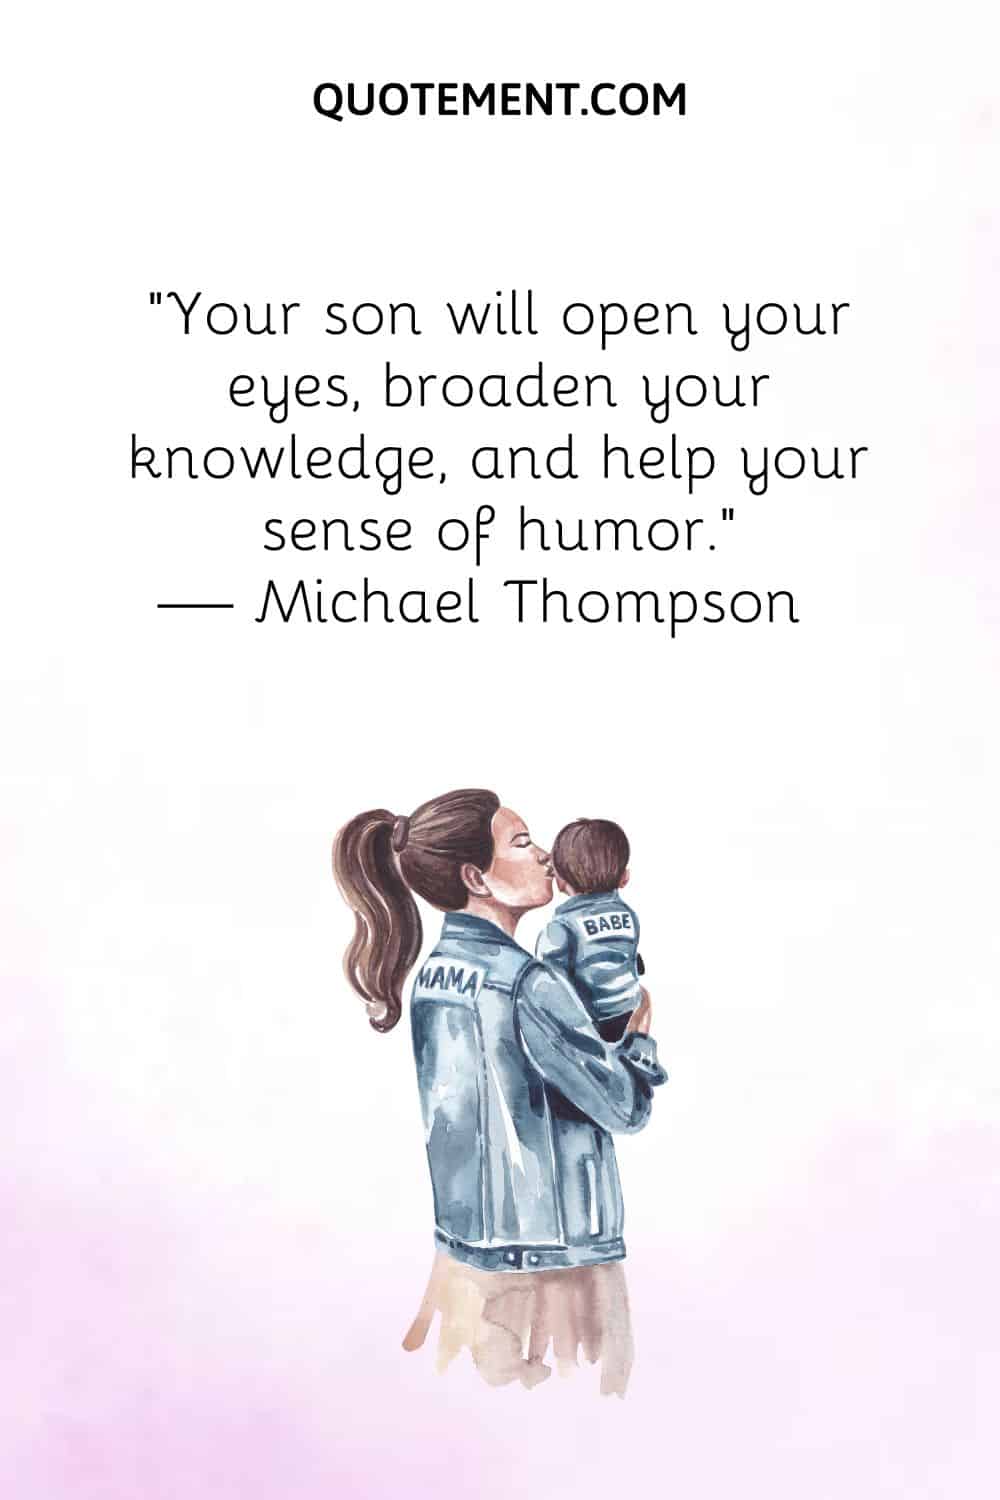 Your son will open your eyes, broaden your knowledge, and help your sense of humor.